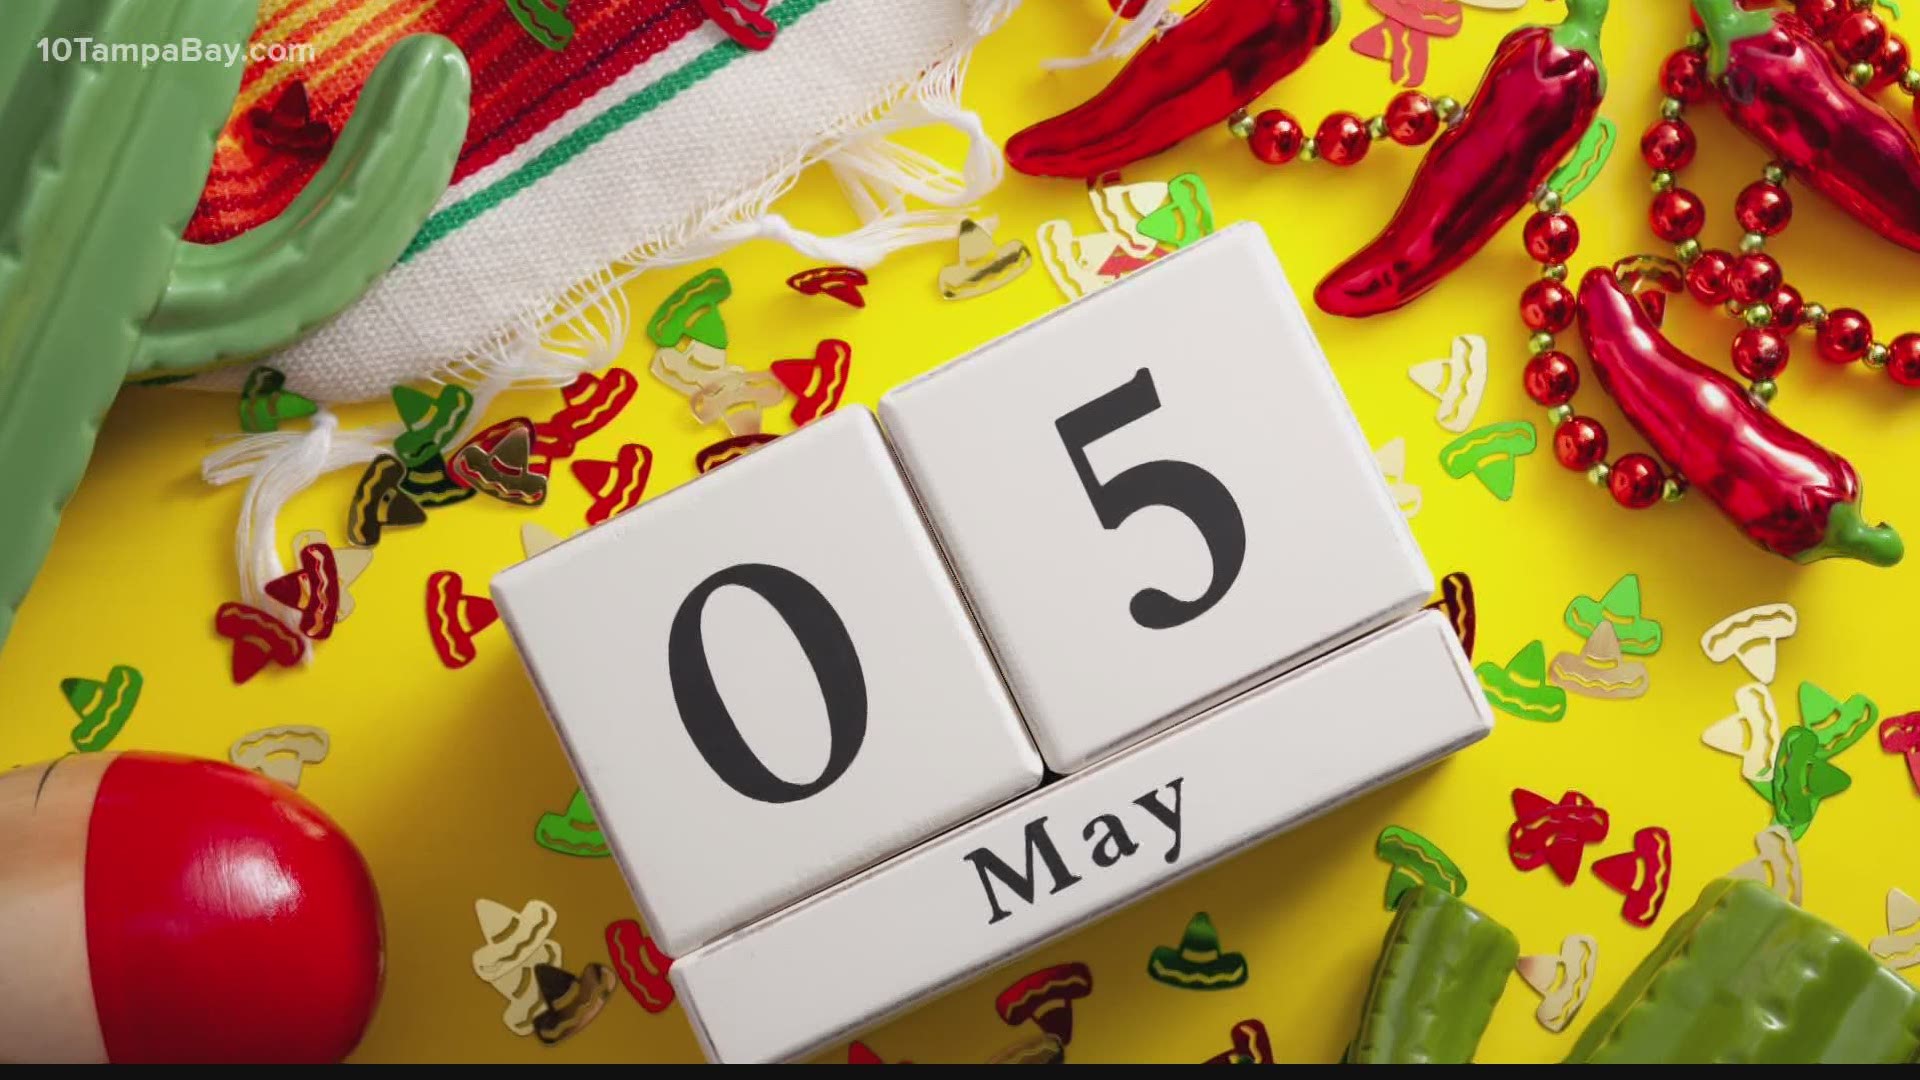 What's the real meaning behind Cinco de Mayo?